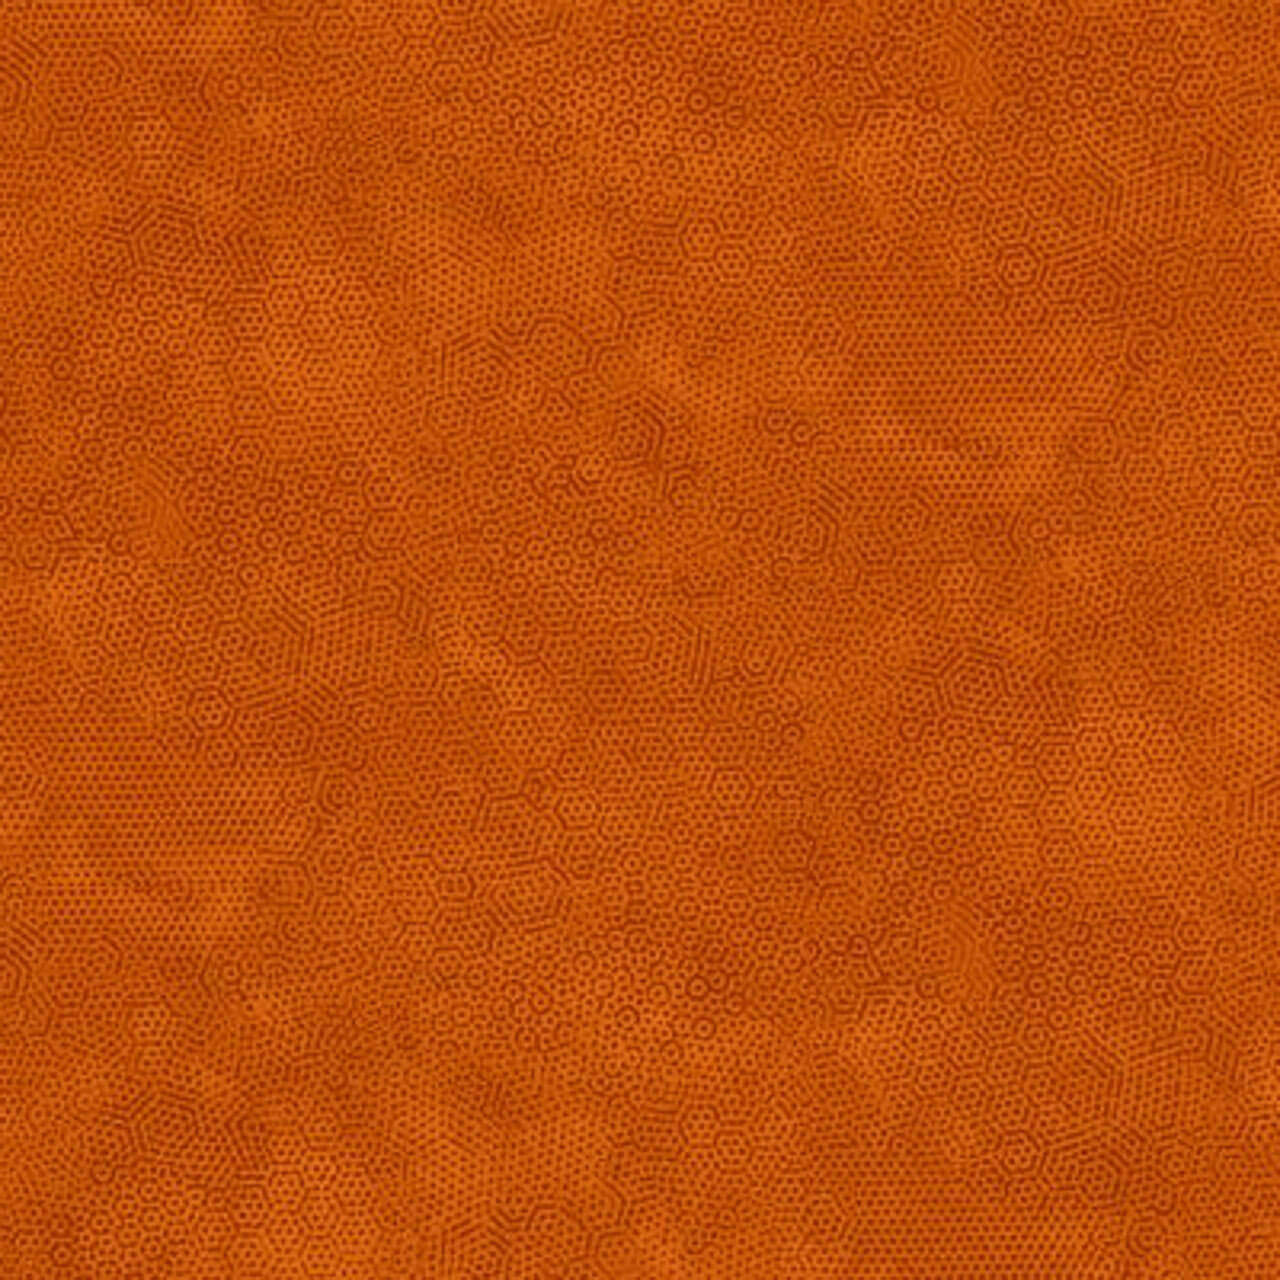 Fabric Sample of Andover Fabrics Dimples Collection in Rust